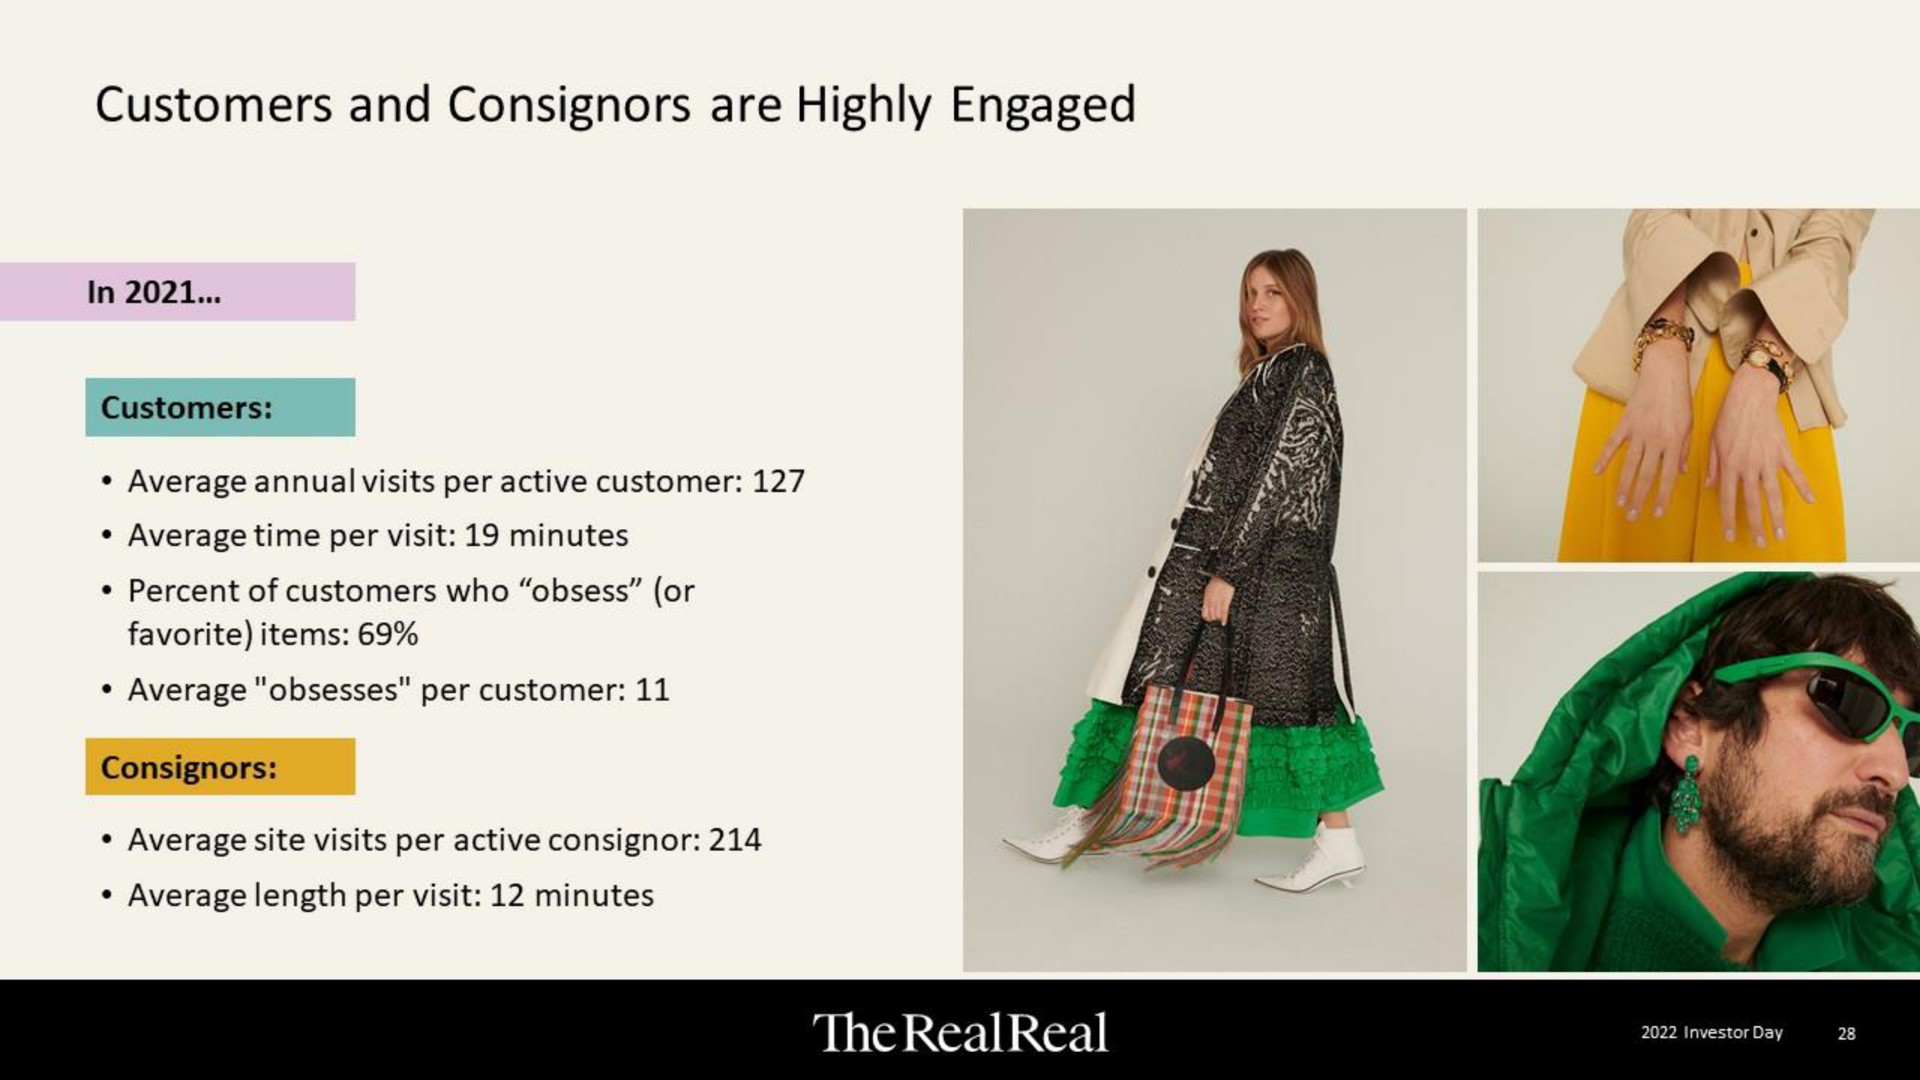 customers and consignors are highly engaged | The RealReal